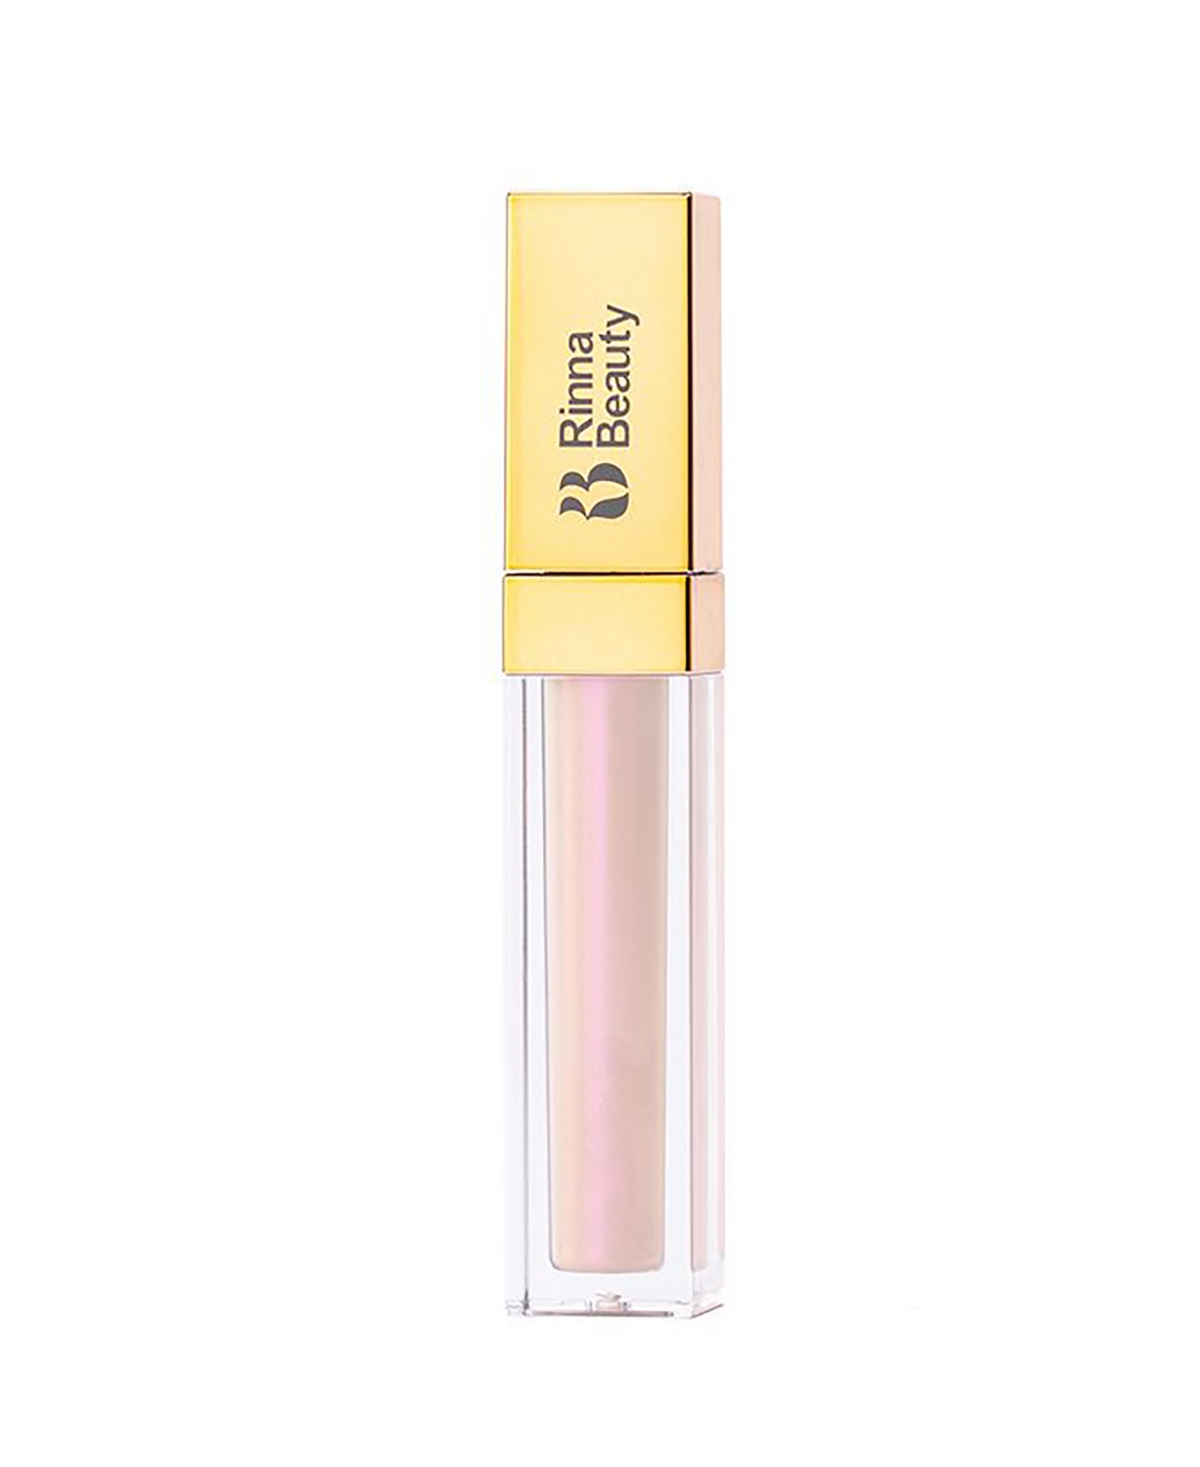 Larger Than Life All That Glitters Lip Plumping Gloss, 0.14 oz. - Creamy Dreamy (sheer silver)